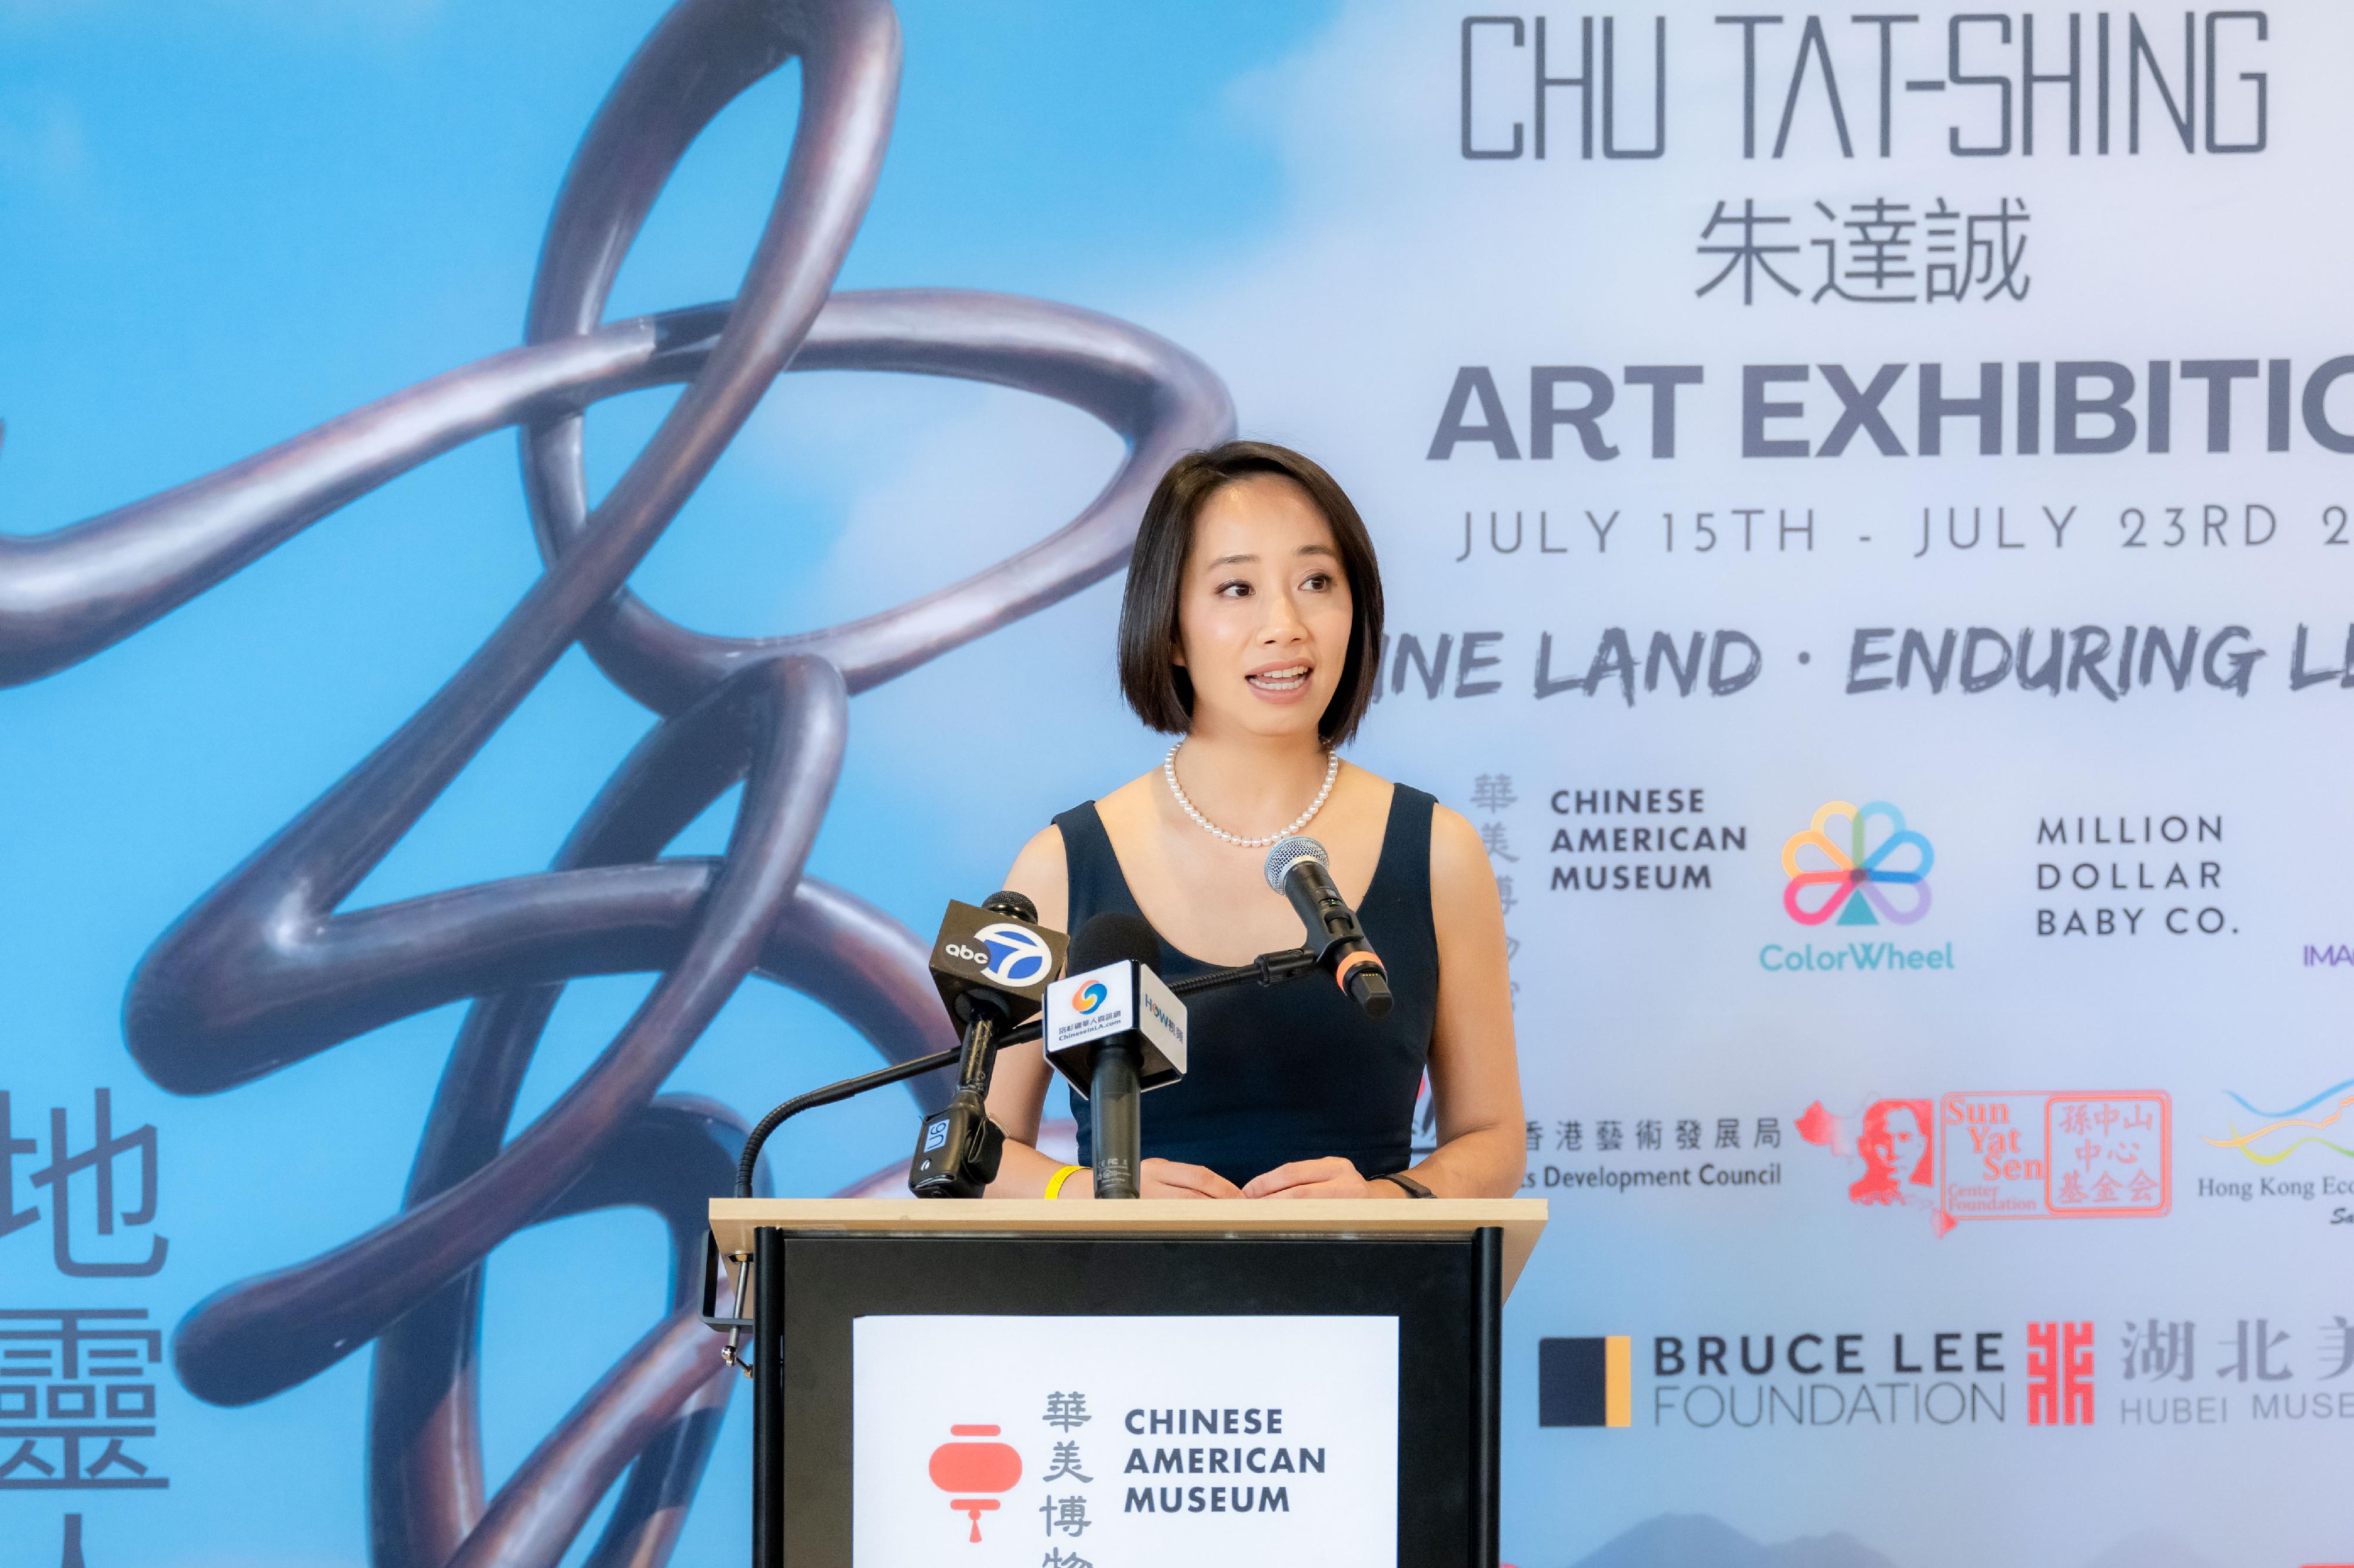 The Hong Kong Economic and Trade Office in San Francisco (HKETO San Francisco) supported the “Chu Tat Shing Art Exhibition - Divine Land. Enduring Legends”, featuring the American debut of works by the internationally renowned sculptor from Hong Kong, which was held in Los Angeles from July 14 to 23 (Los Angeles time). Photo shows the Director of HKETO San Francisco, Ms Jacko Tsang, delivering remarks at the opening ceremony on July 14 (Los Angeles time).